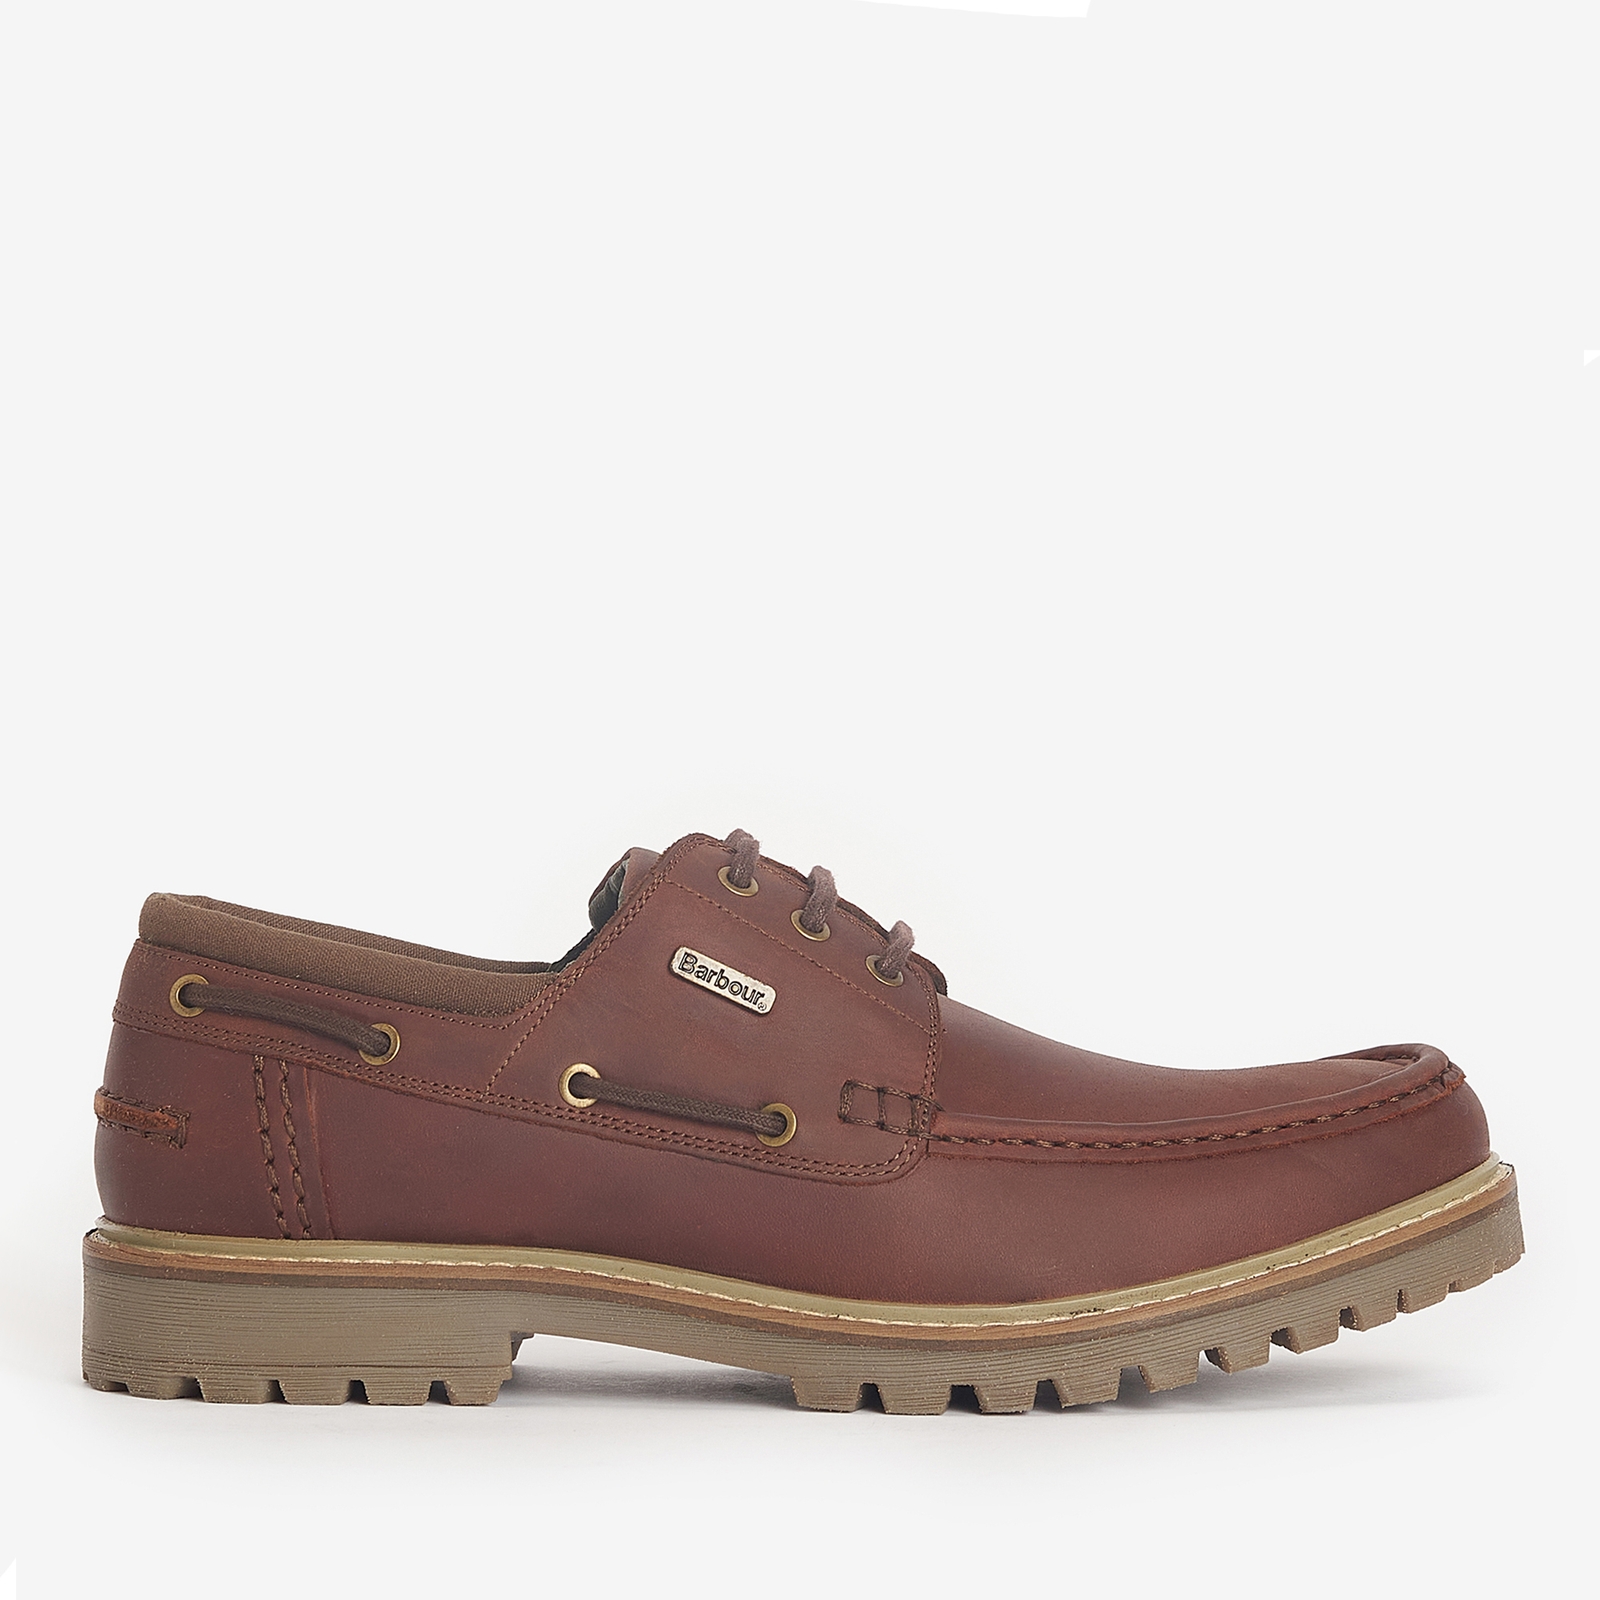 Barbour Basalt Leather Boats Shoes